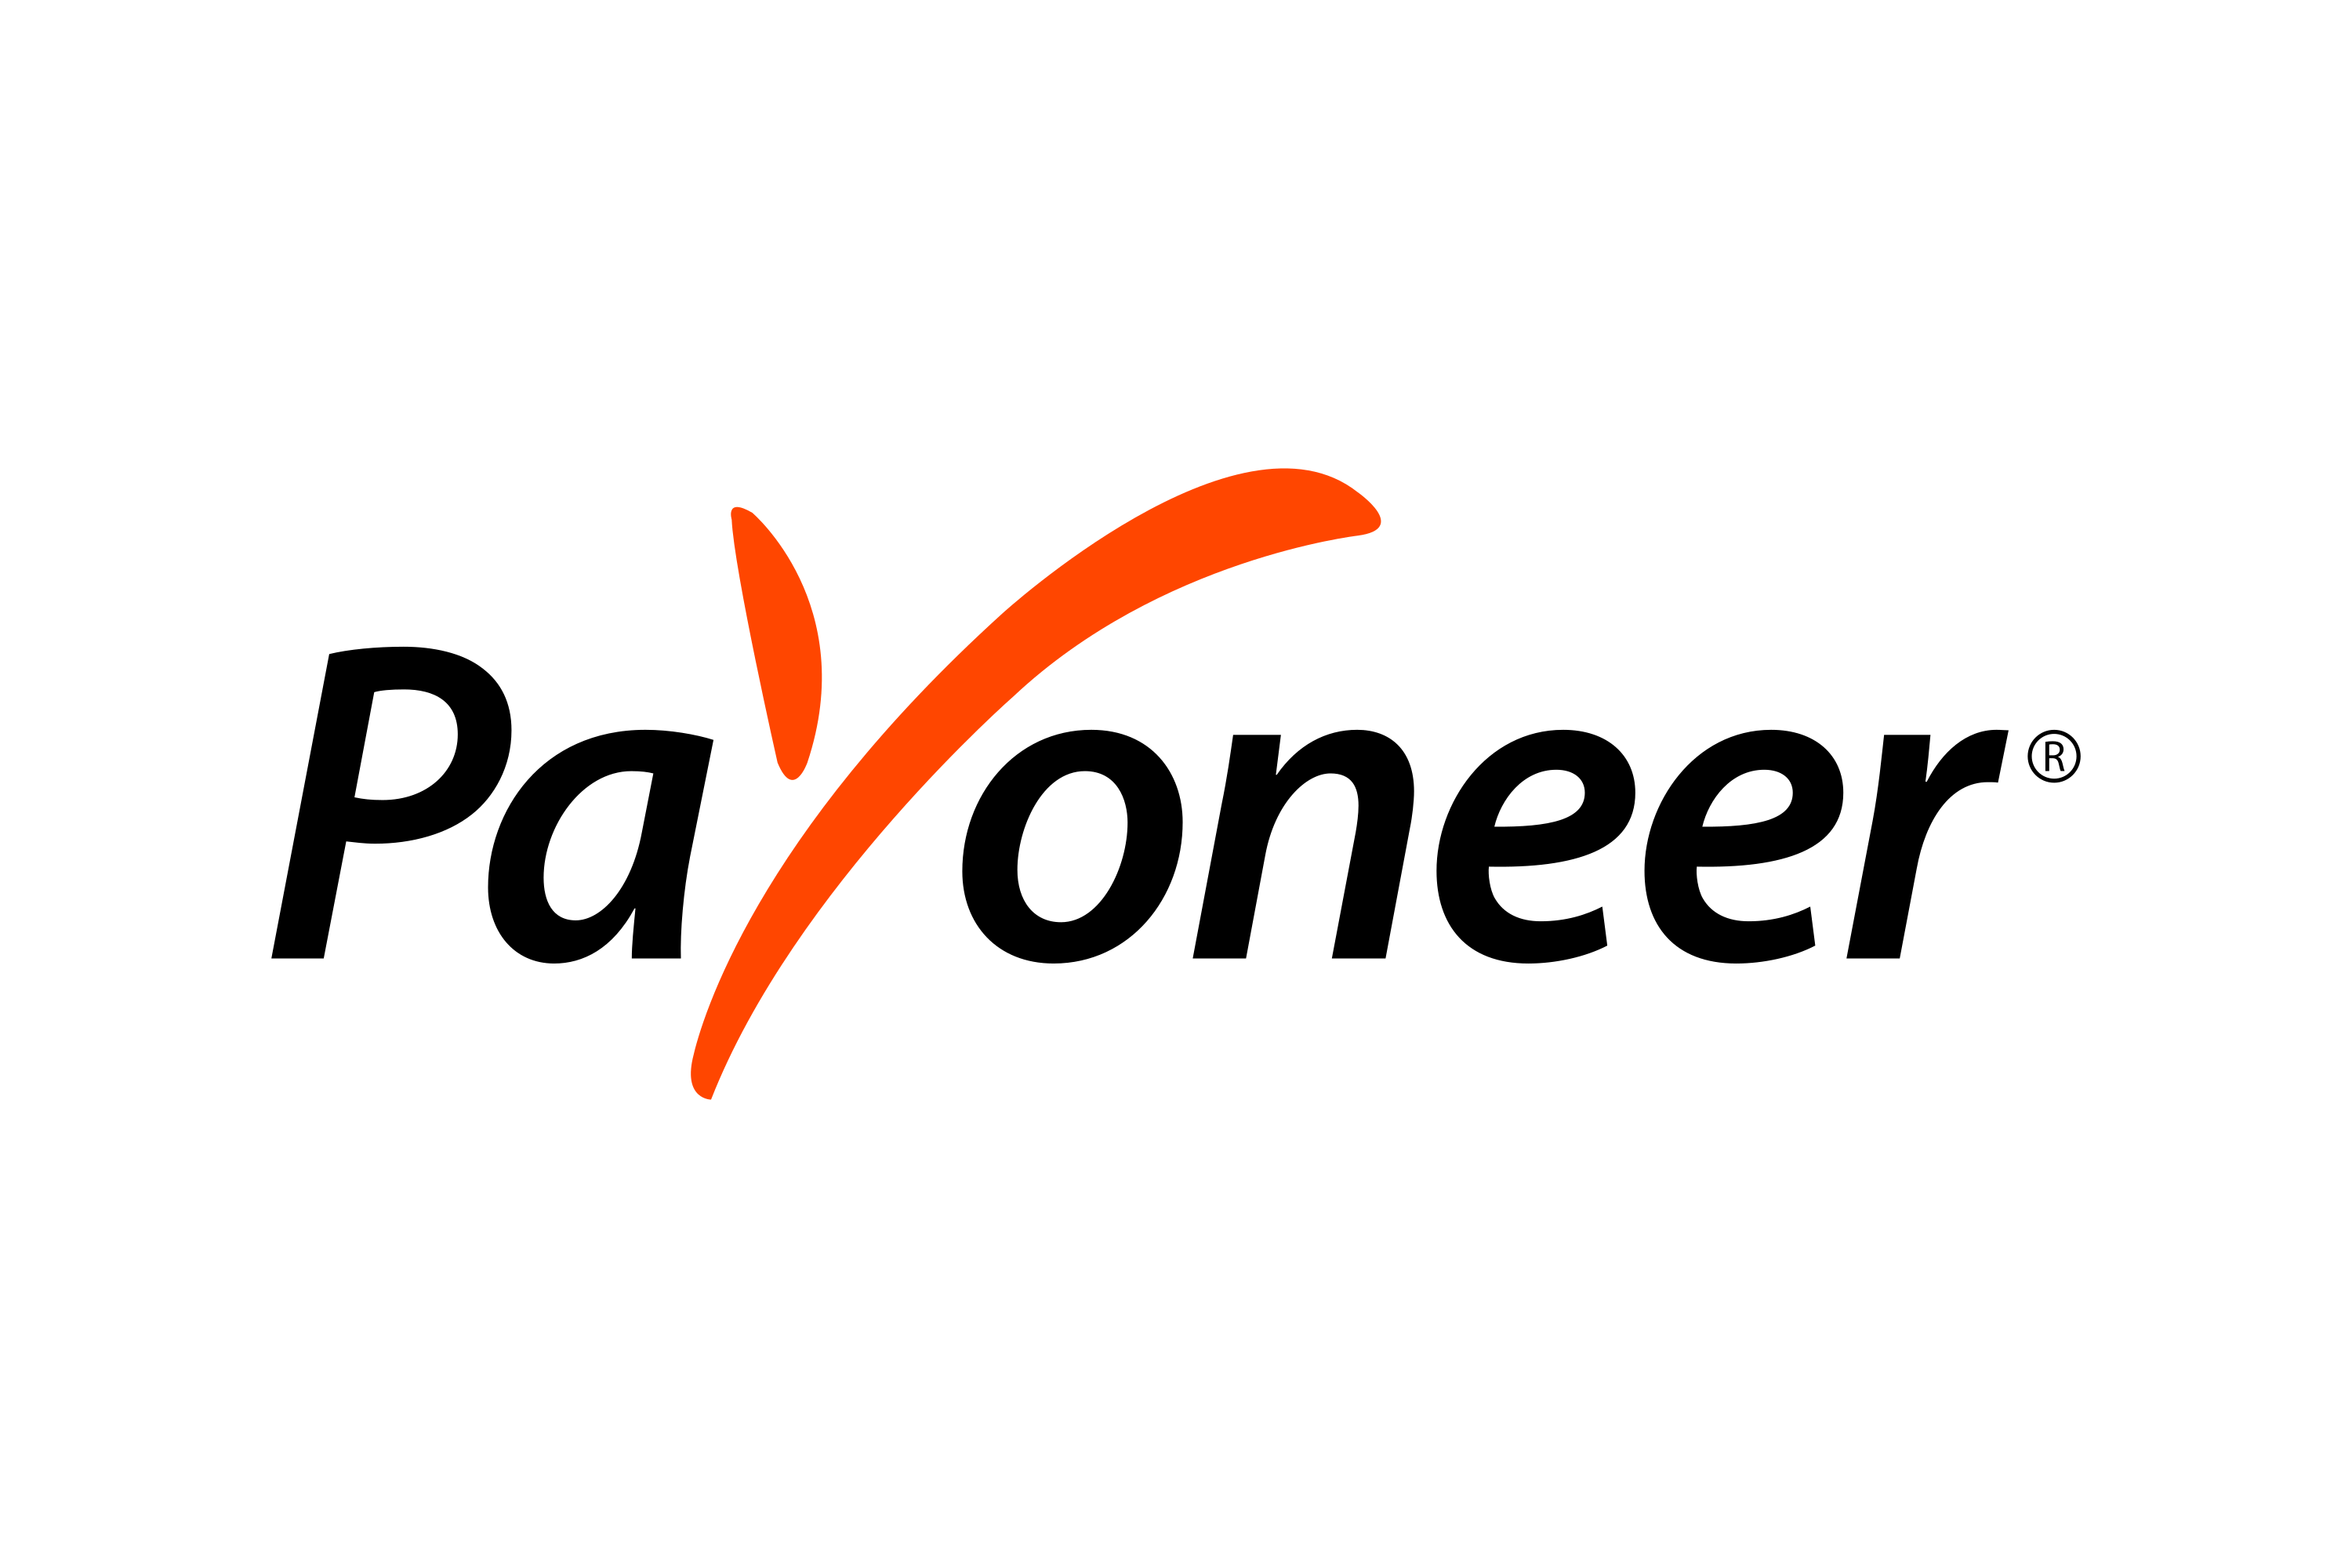 Download Payoneer Logo in SVG Vector or PNG File Format - Logo.wine